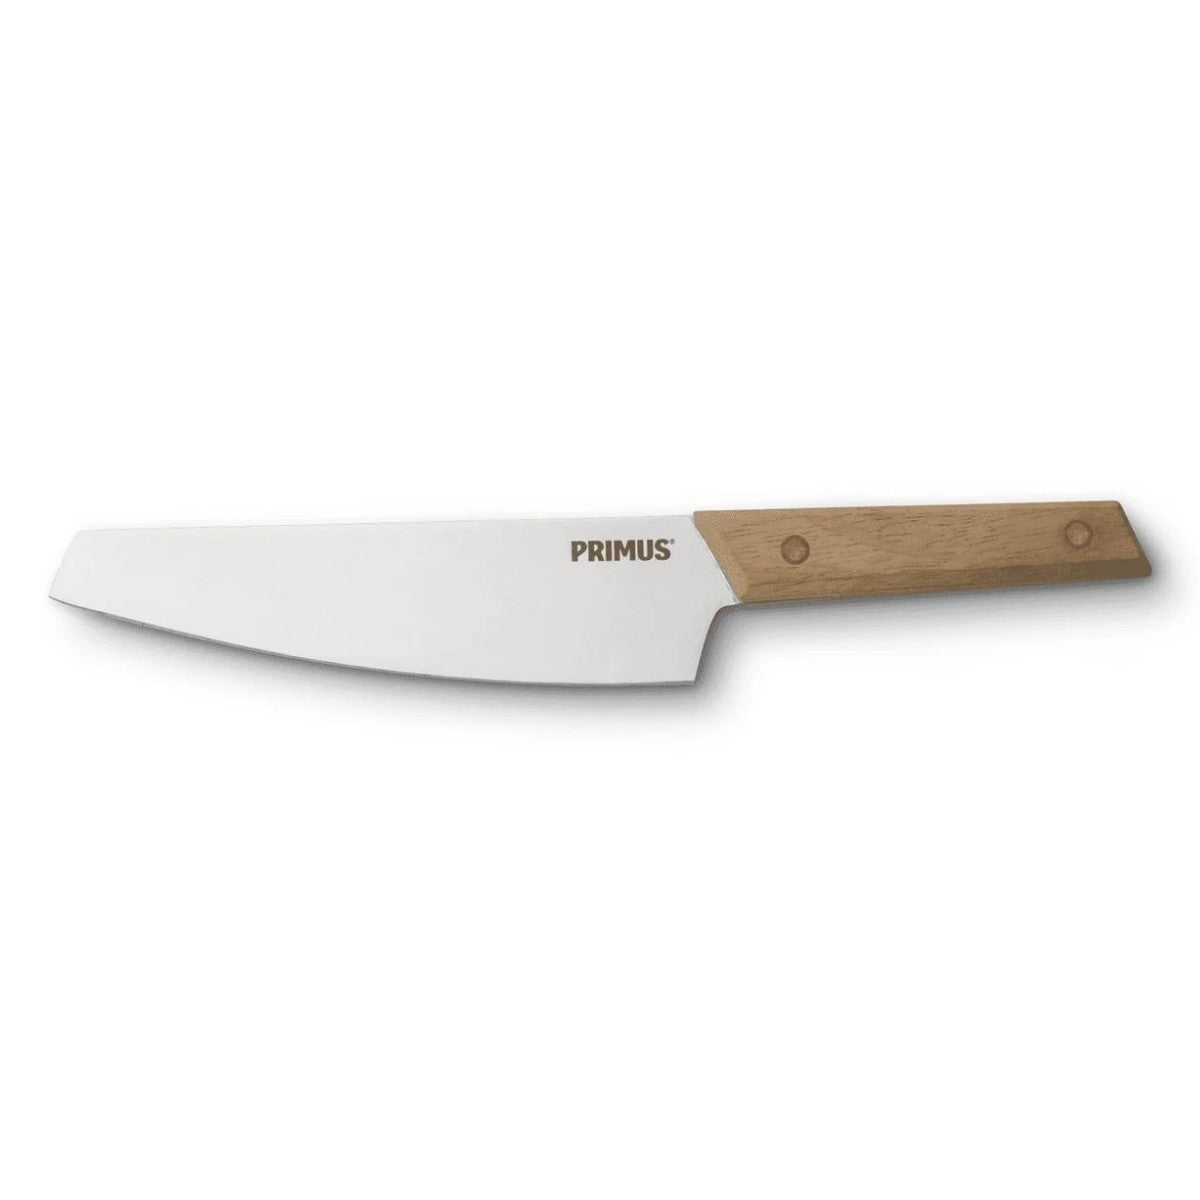 Primus Large CampFire Knife